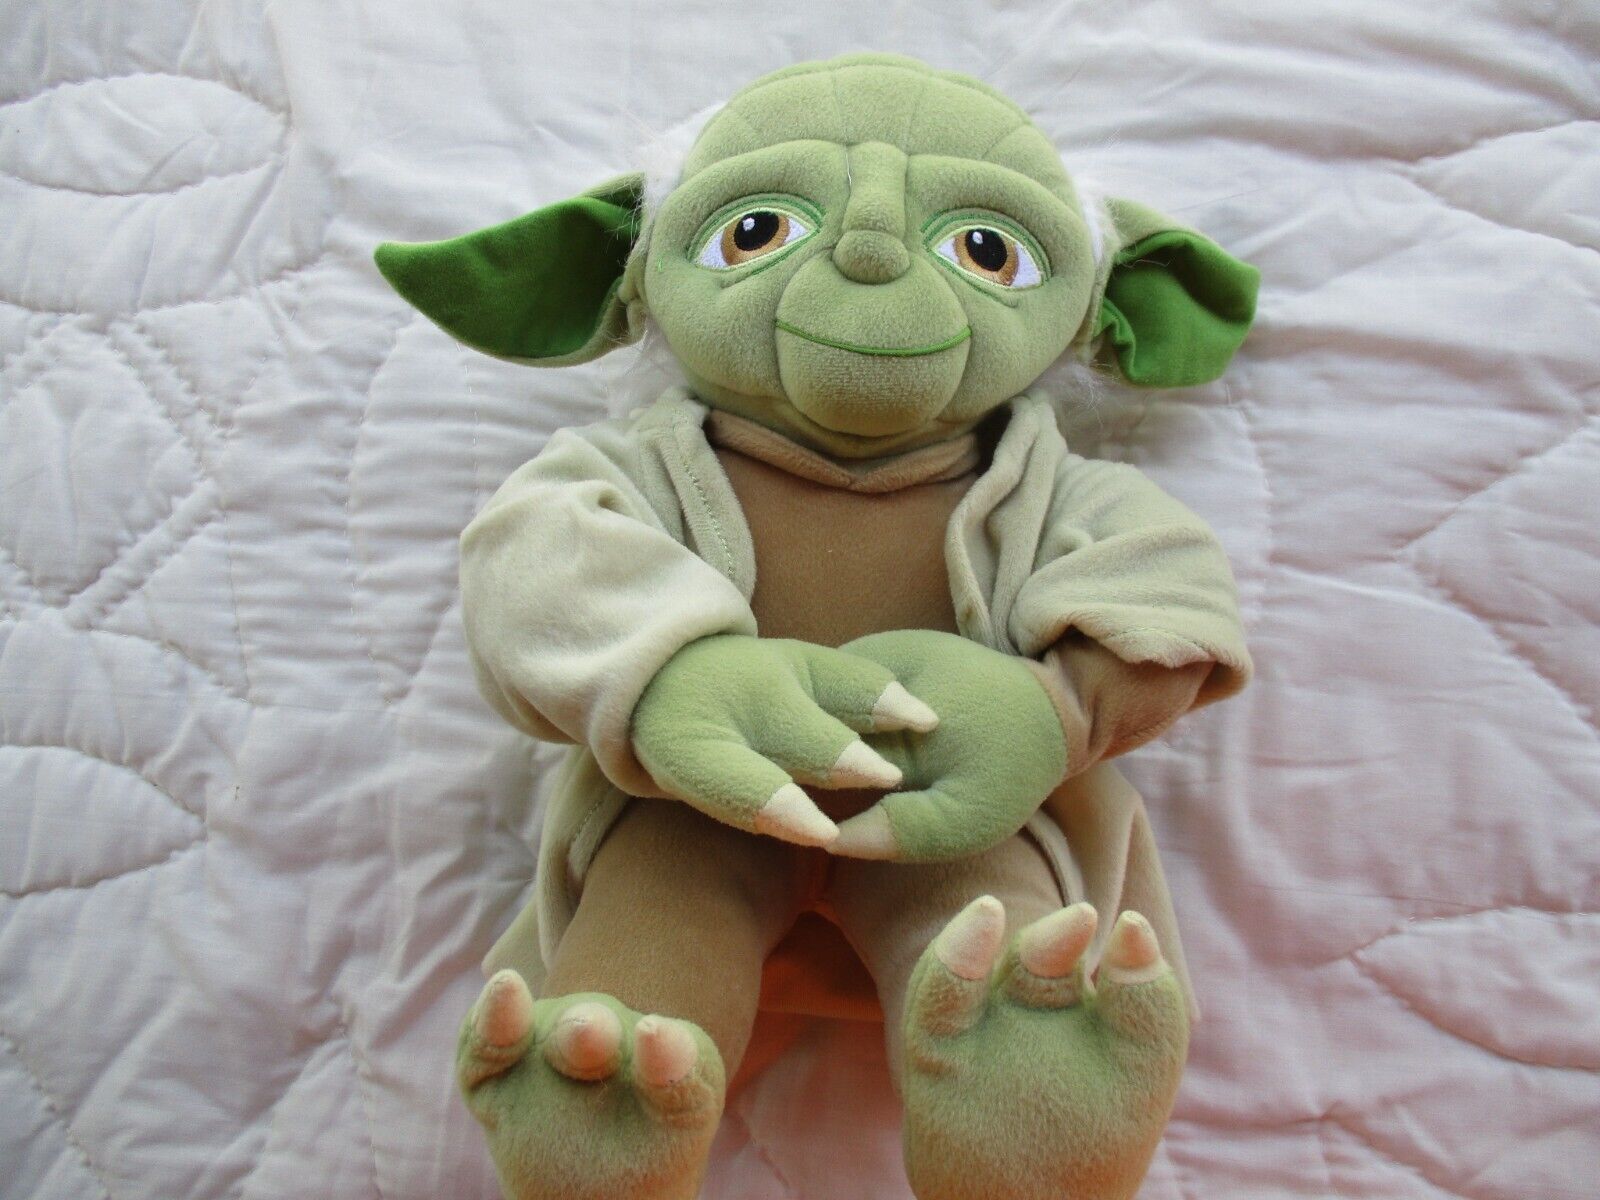 Star Wars Yoda Plush,Excellent Condition,18 inch Stuffed Toy,Life Like